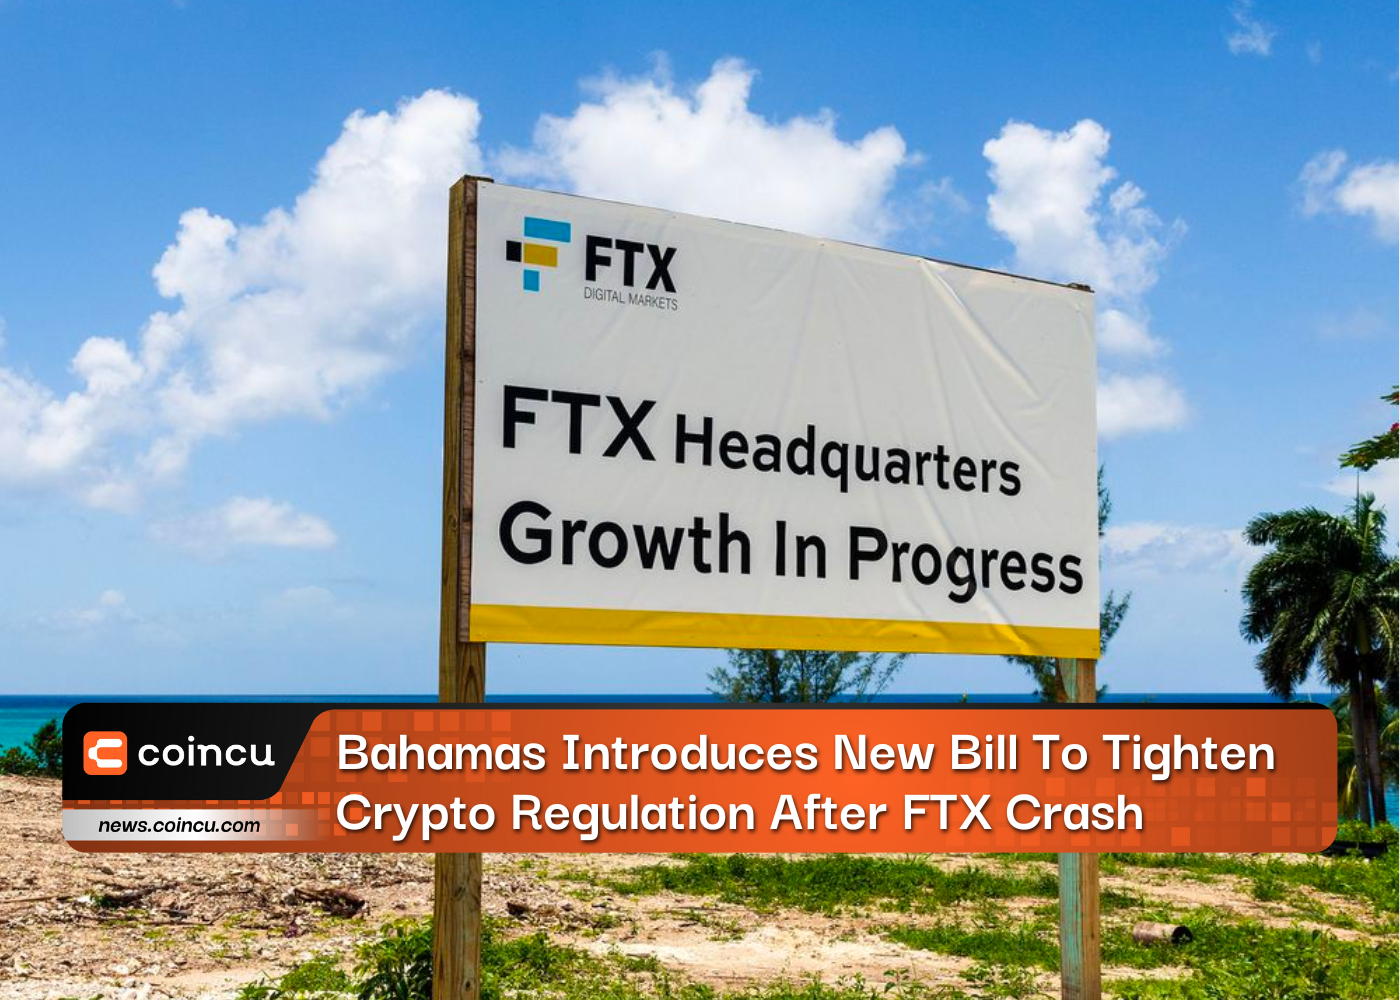 Bahamas Introduces New Bill To Tighten Crypto Regulation After FTX Crash